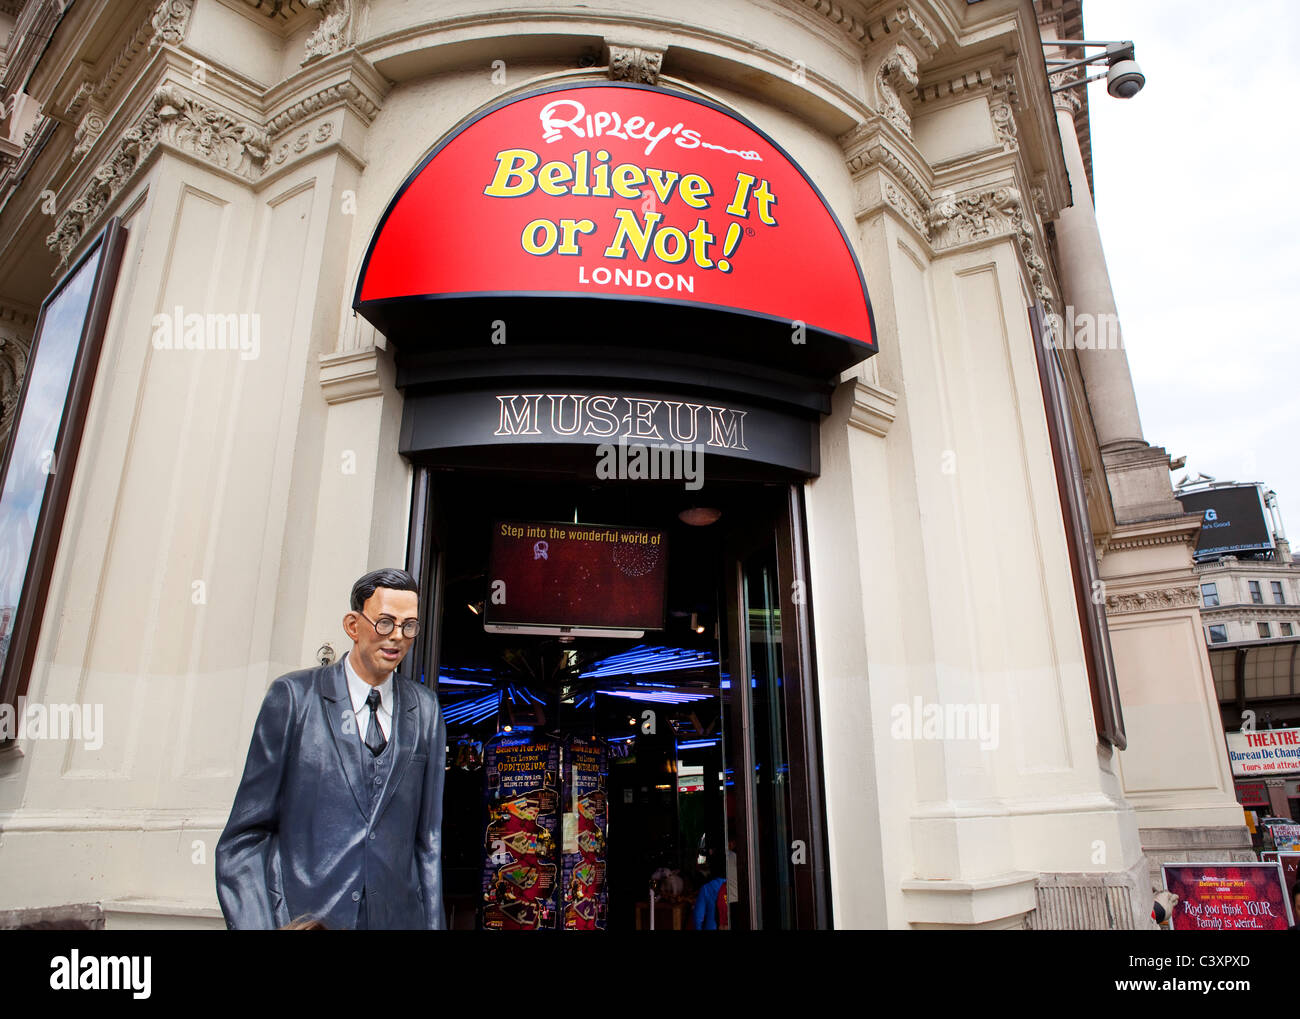 Ripley's Believe it or not ! Attractions touristiques de Londres. Piccadilly Circus. Banque D'Images